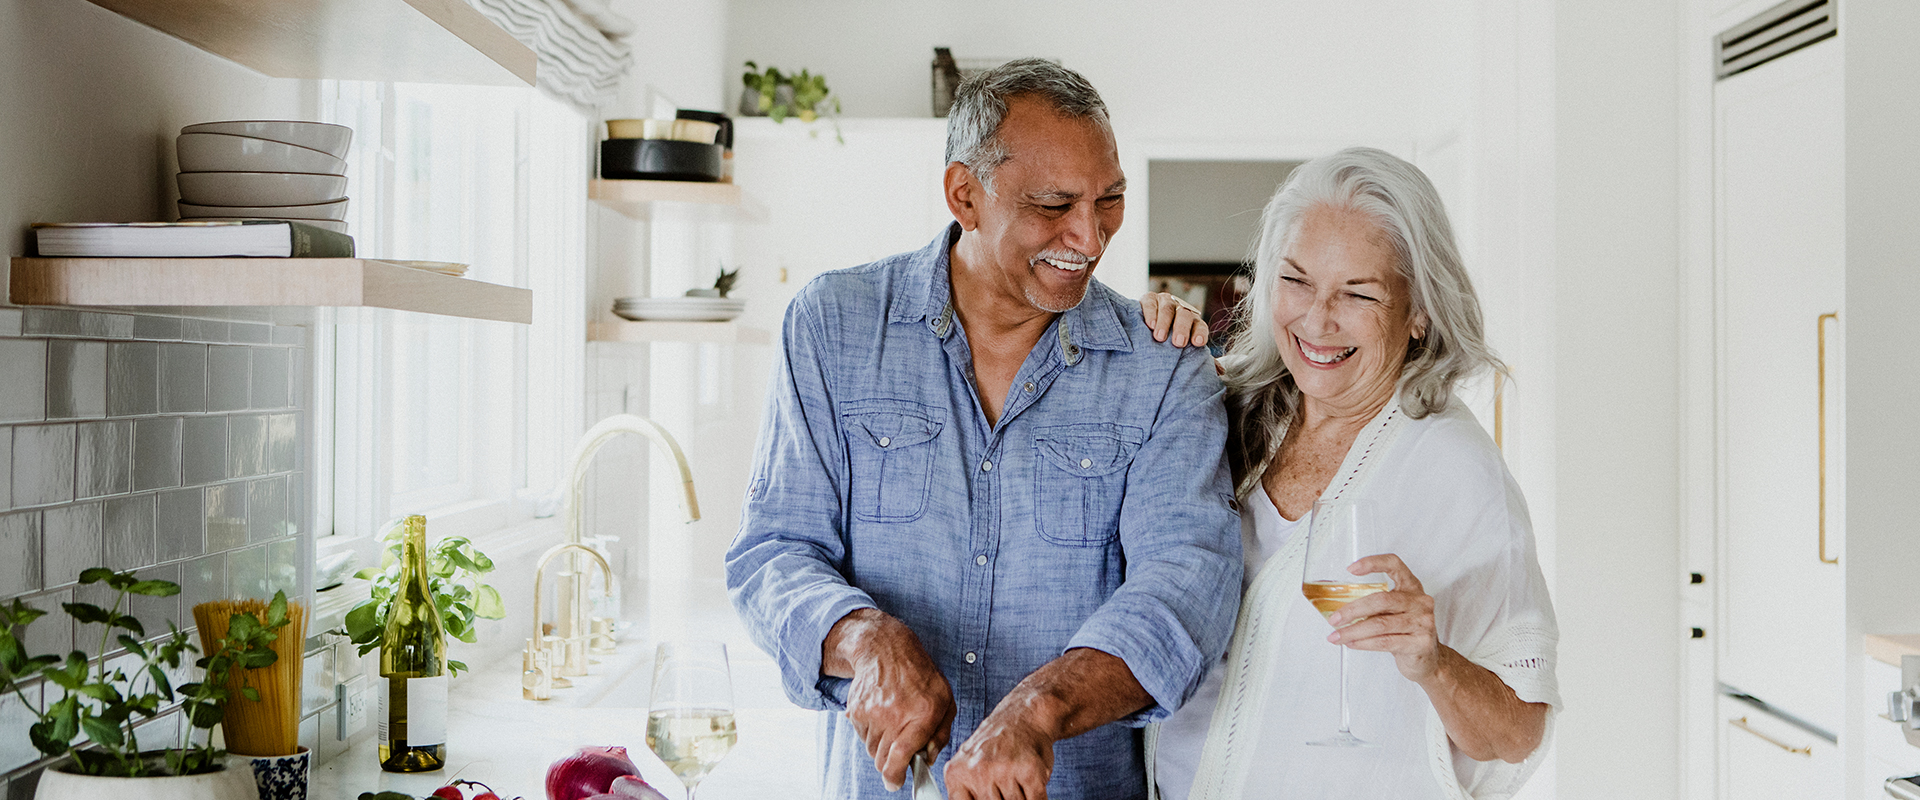 We’re so glad to do a reverse mortgage and use Benefit!